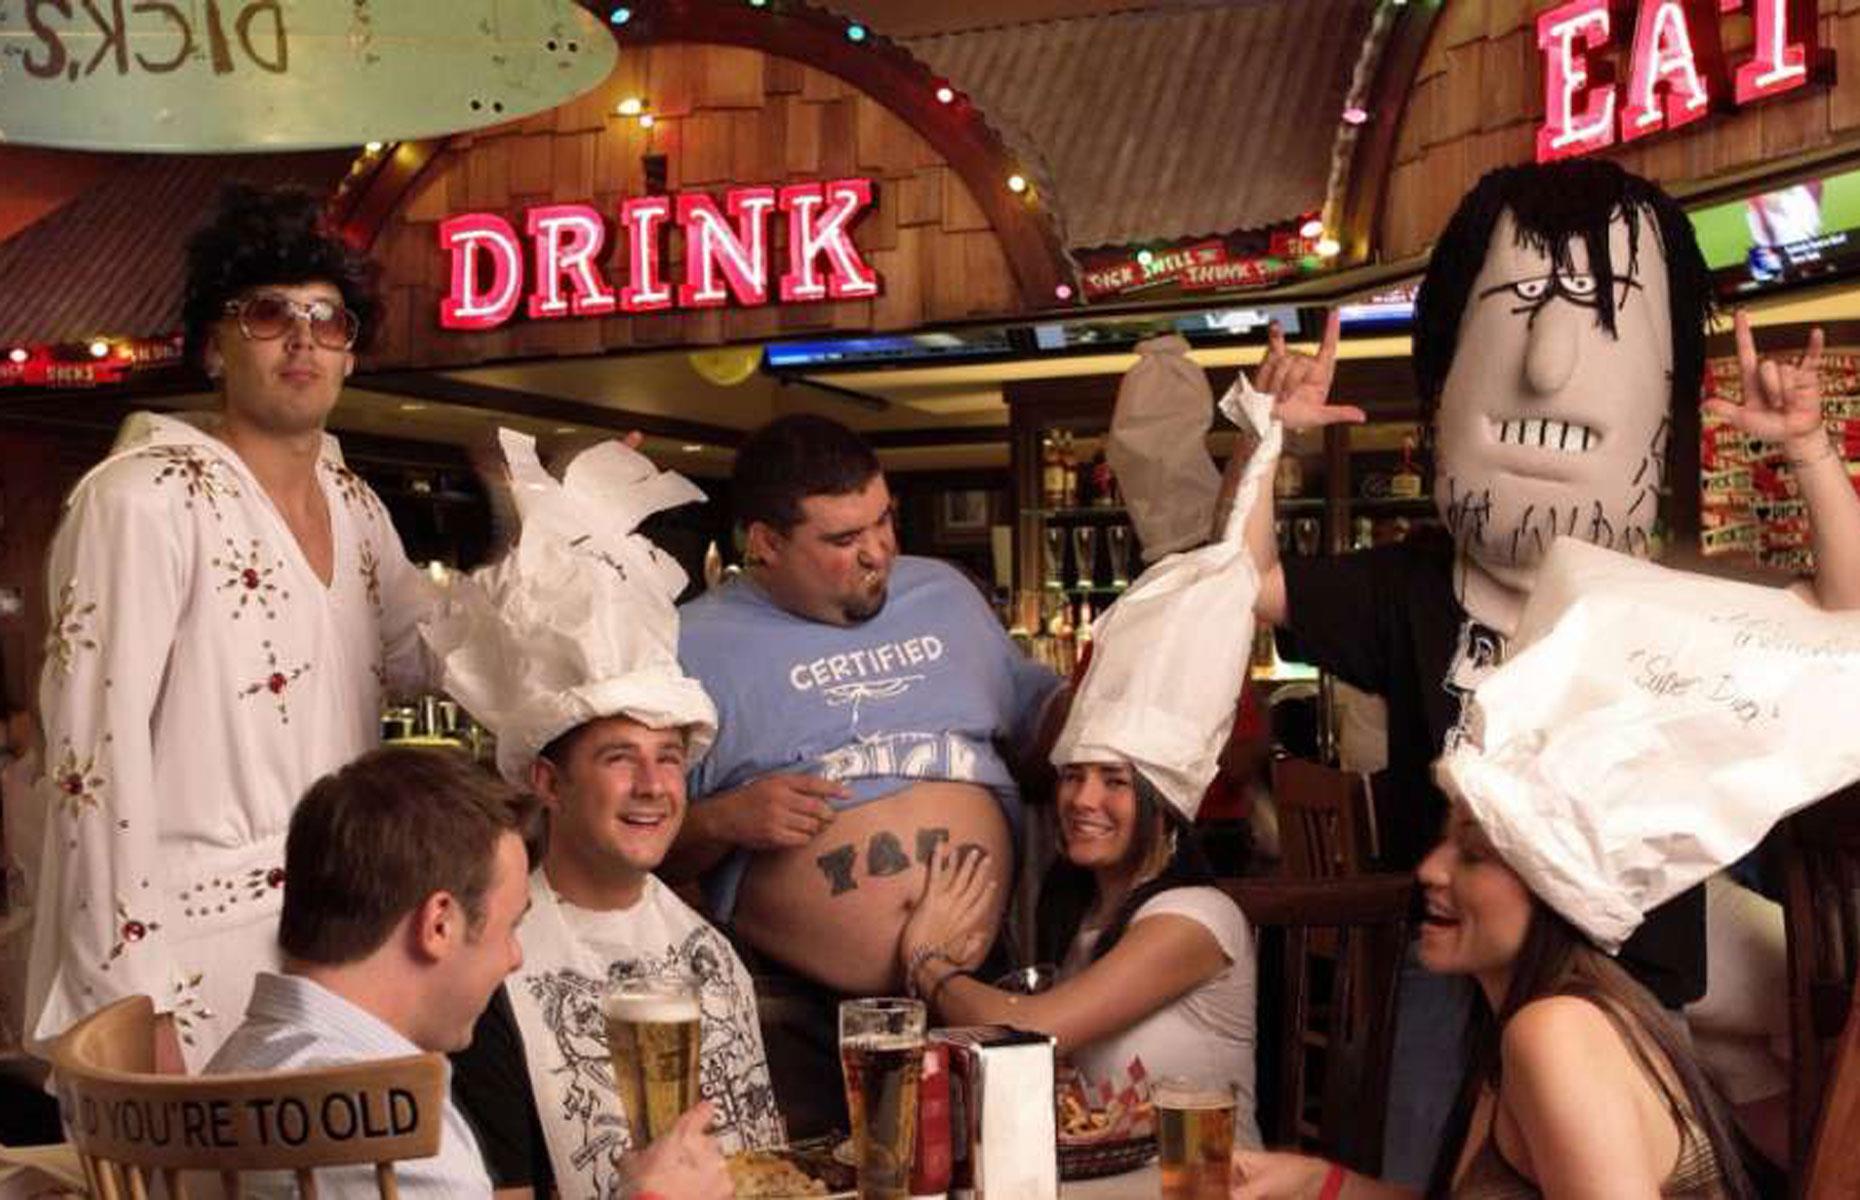 Dick's Last Resort – restaurant/bar chain renowned for its rude staff